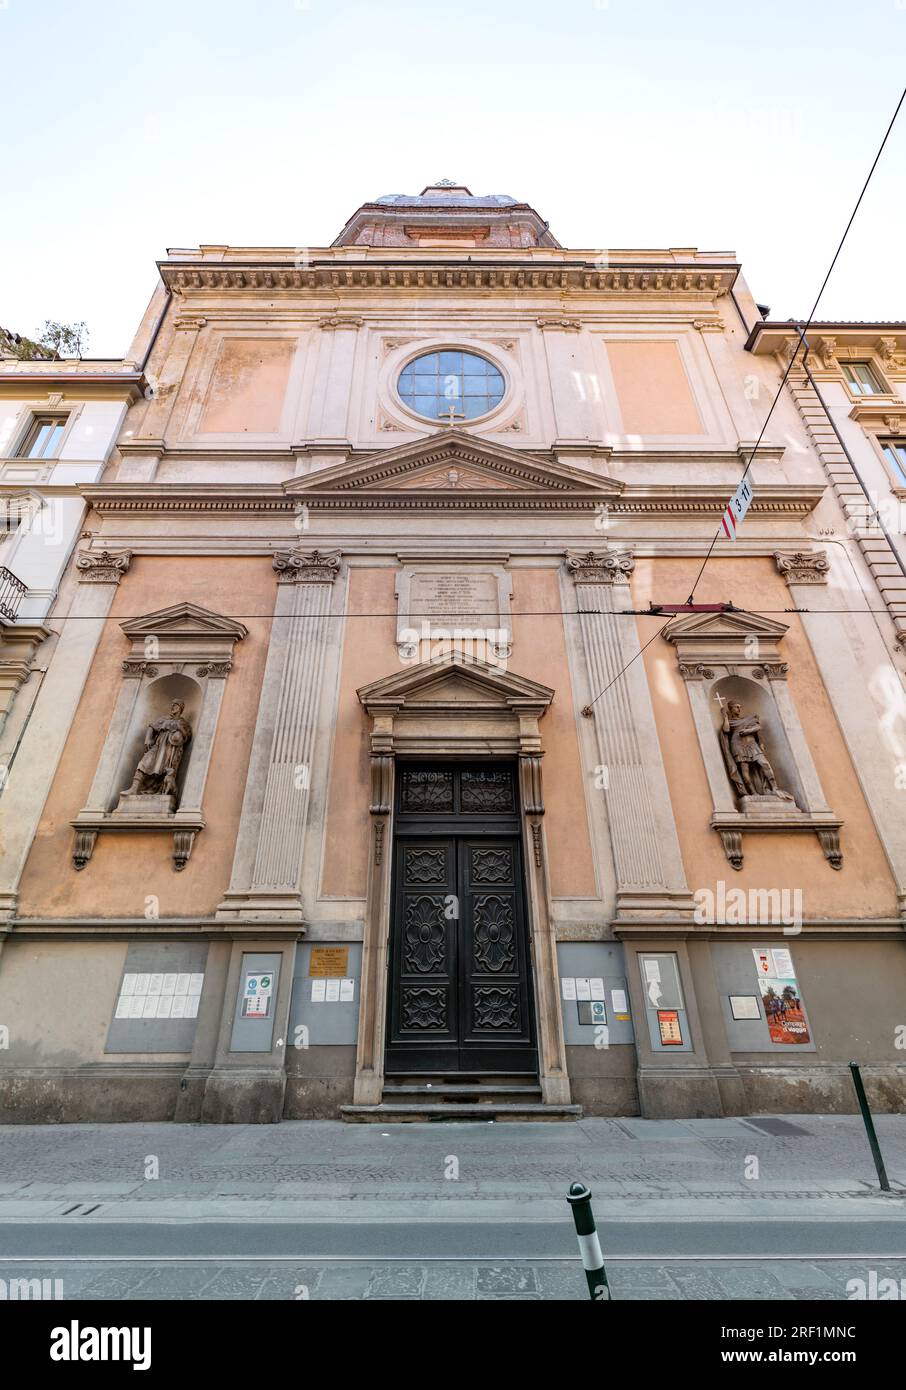 Turin, Italy - March 28, 2022: The church of San Rocco is one of the churches of Turin, located in via San Francesco d'Assisi. Stock Photo